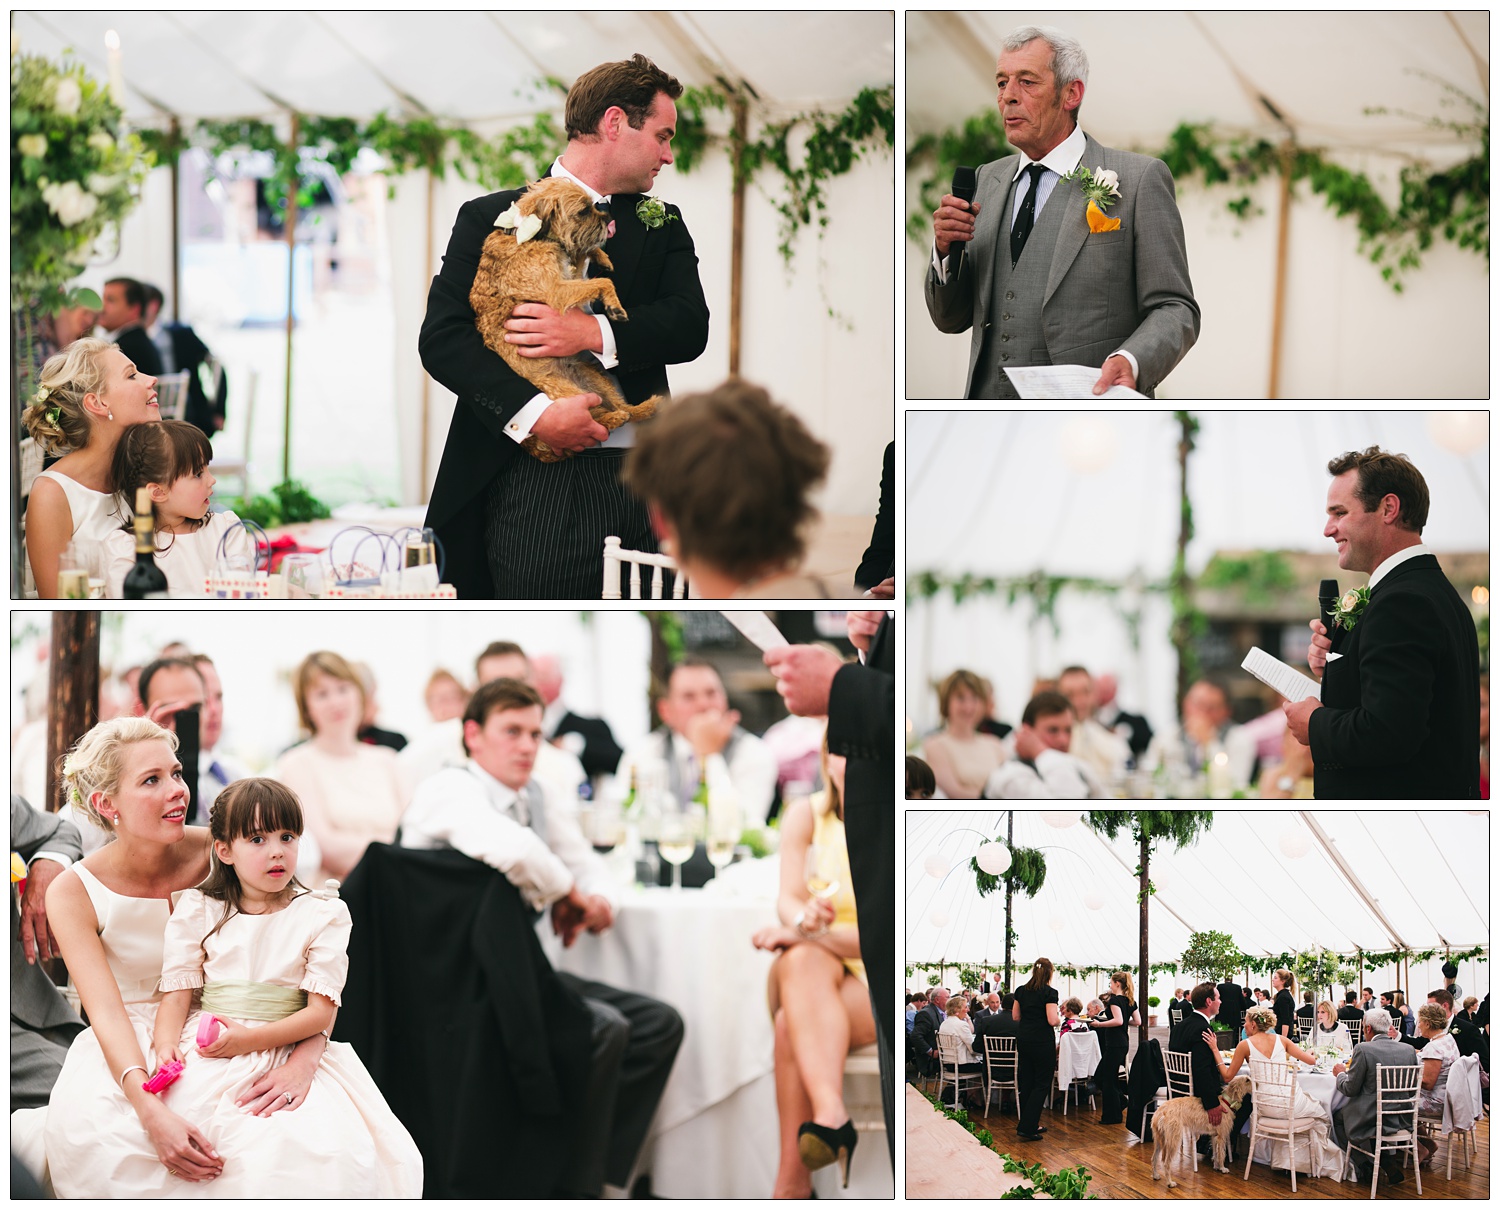 A man at his wedding breakfast holds his dog. Father of the bride is giving a speech. A young girl sits on the bride's lap.